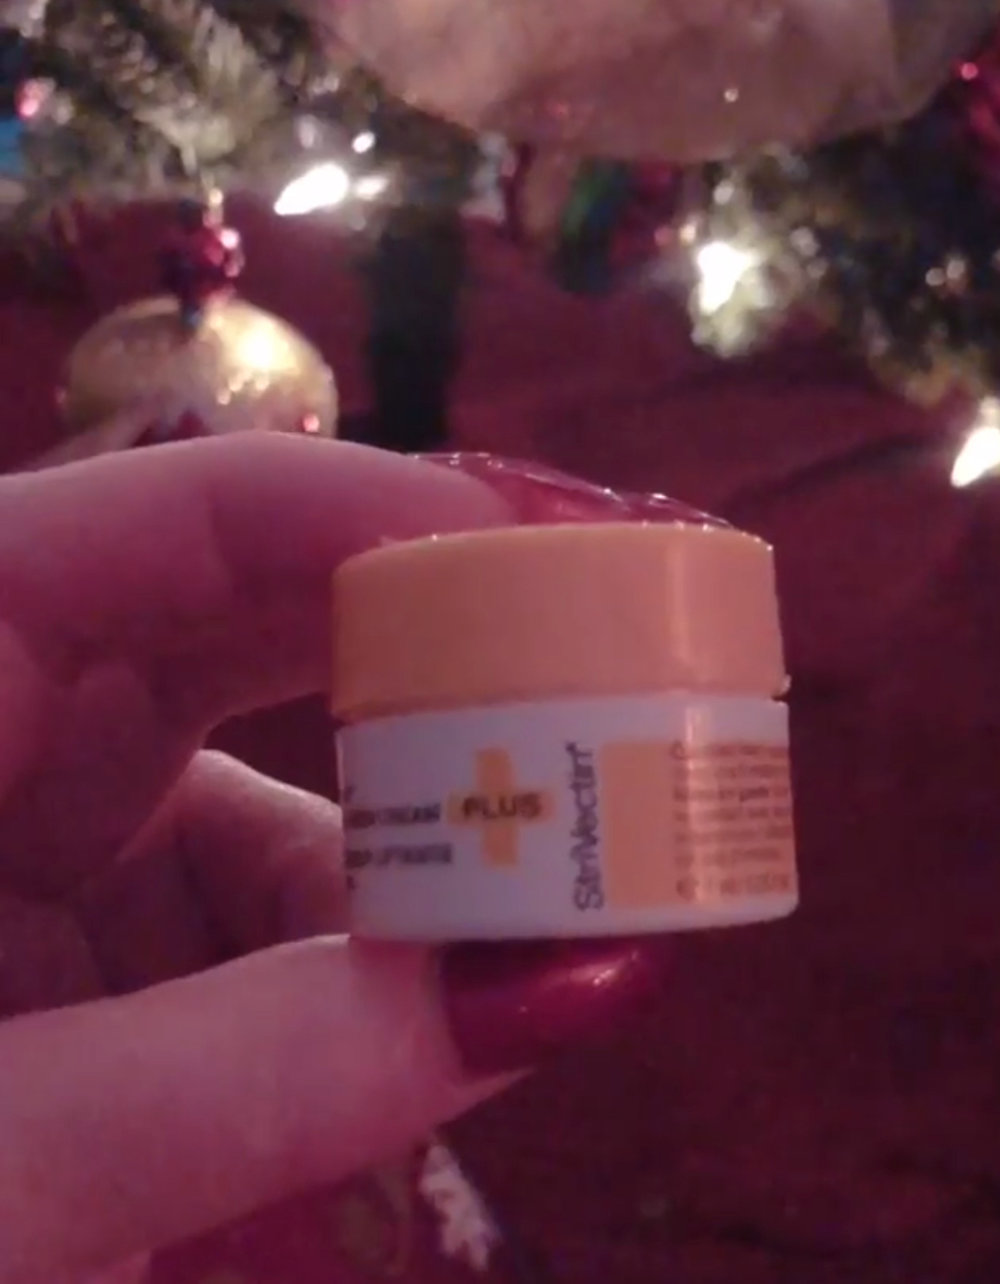 Copy of December 1st:  NIA 214 Technology TL Advanced Tightening Neck Cream by Strivectin